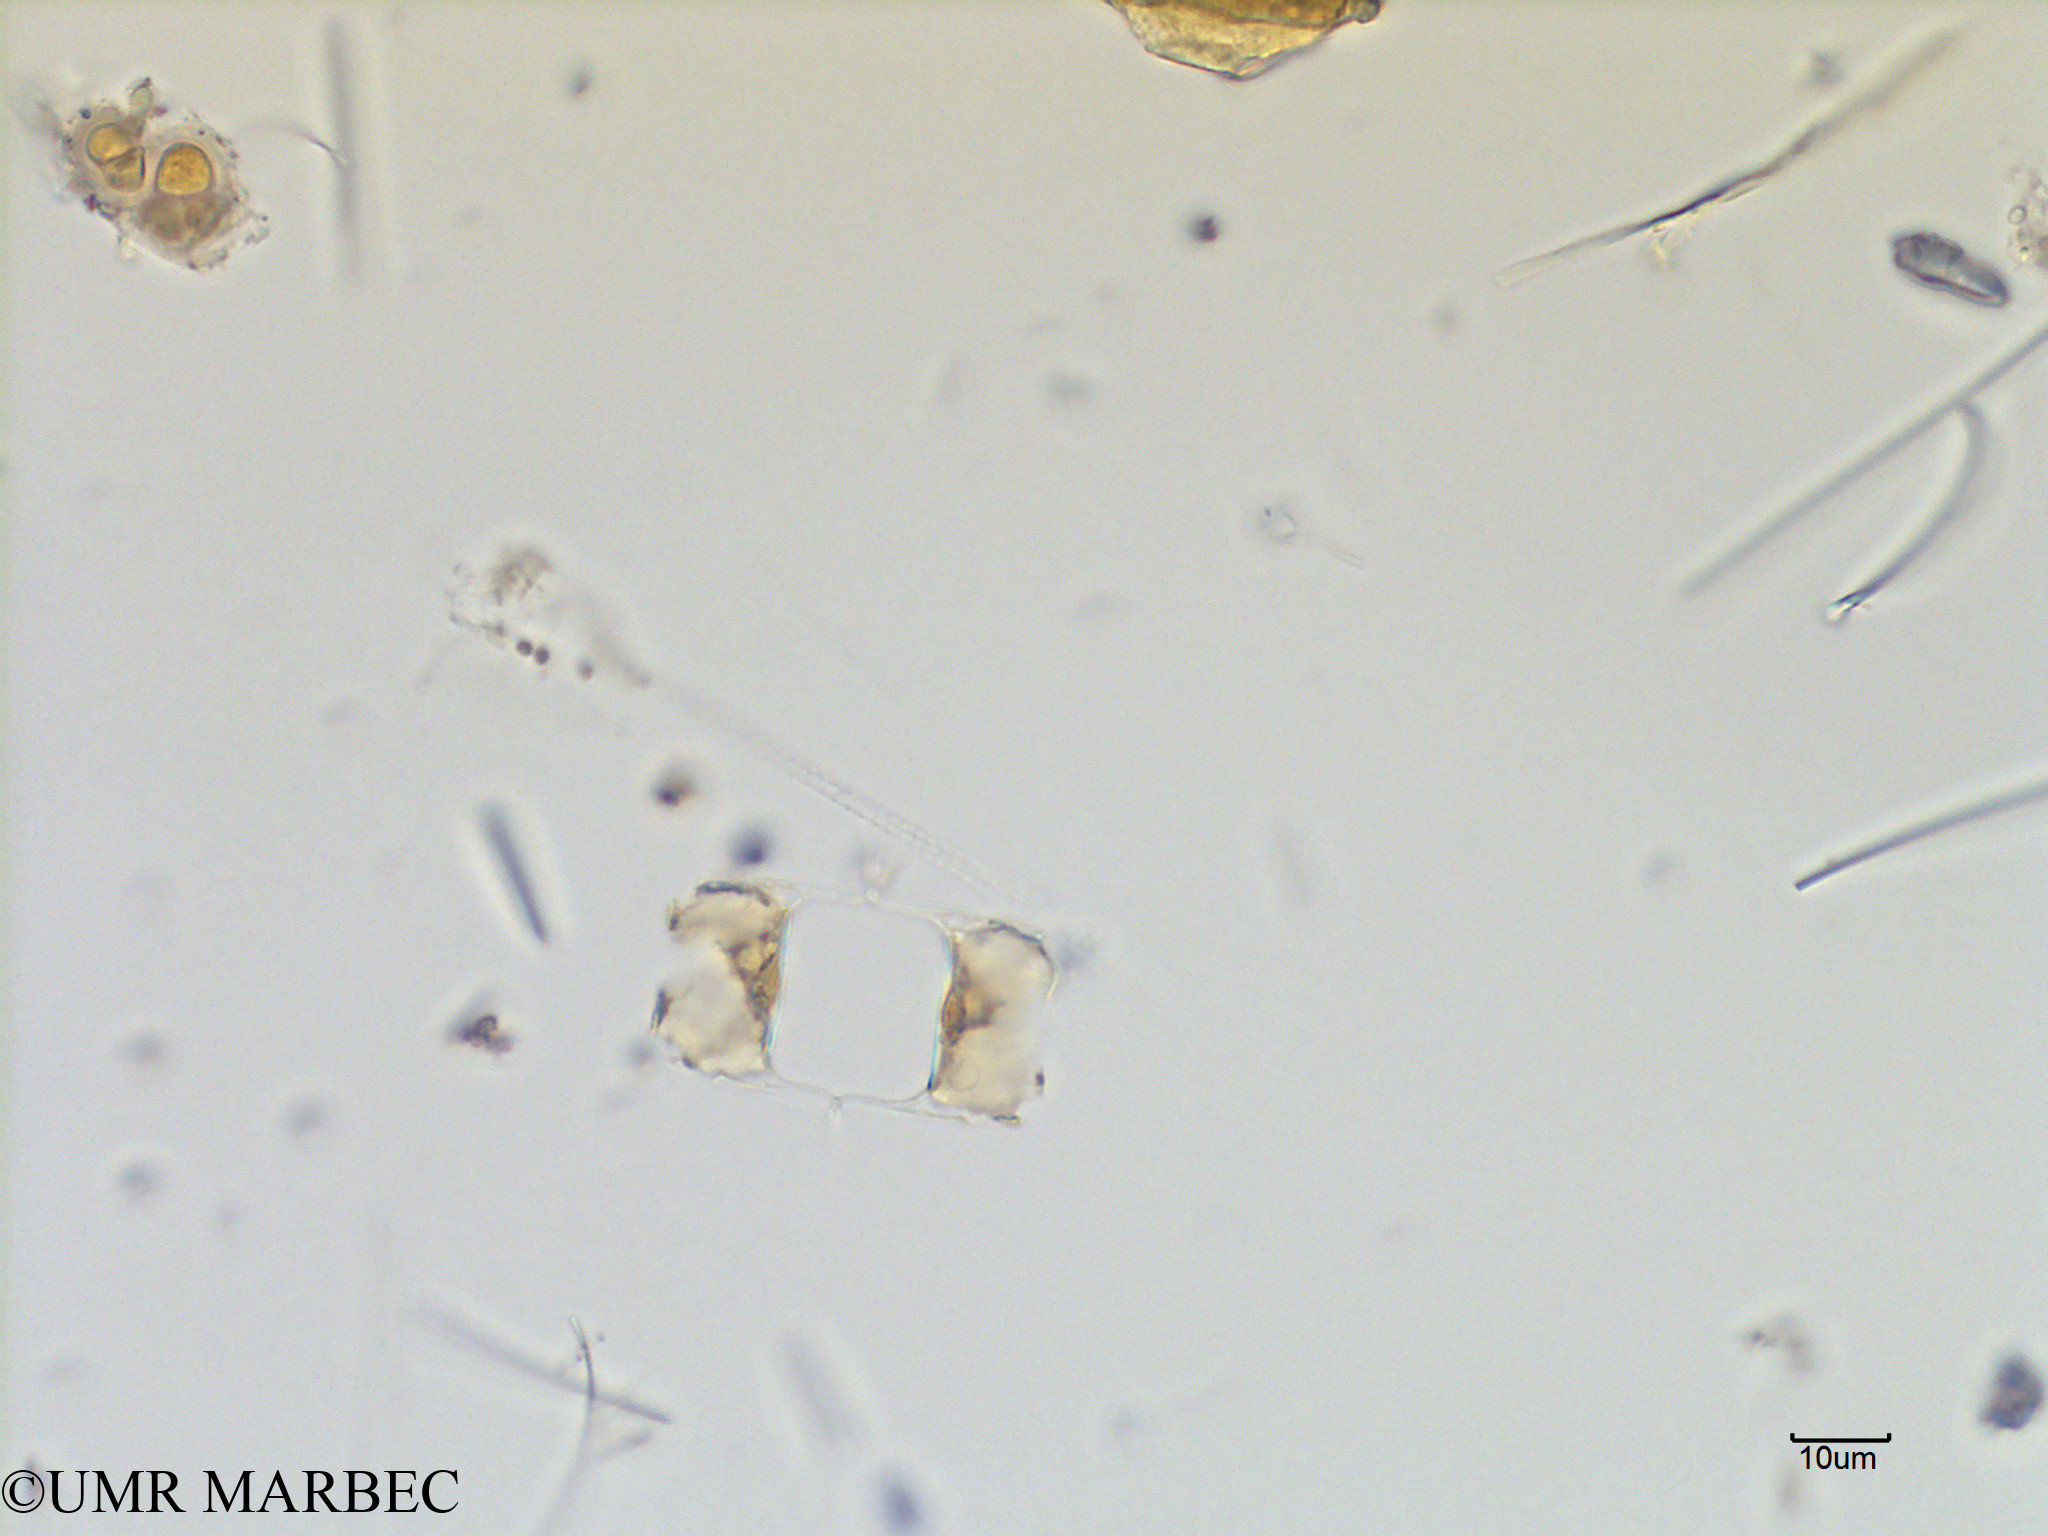 phyto/Scattered_Islands/mayotte_lagoon/SIREME May 2016/Chaetoceros distans (old C. sp36 -MAY5_chaetoceros a-3).tif(copy).jpg